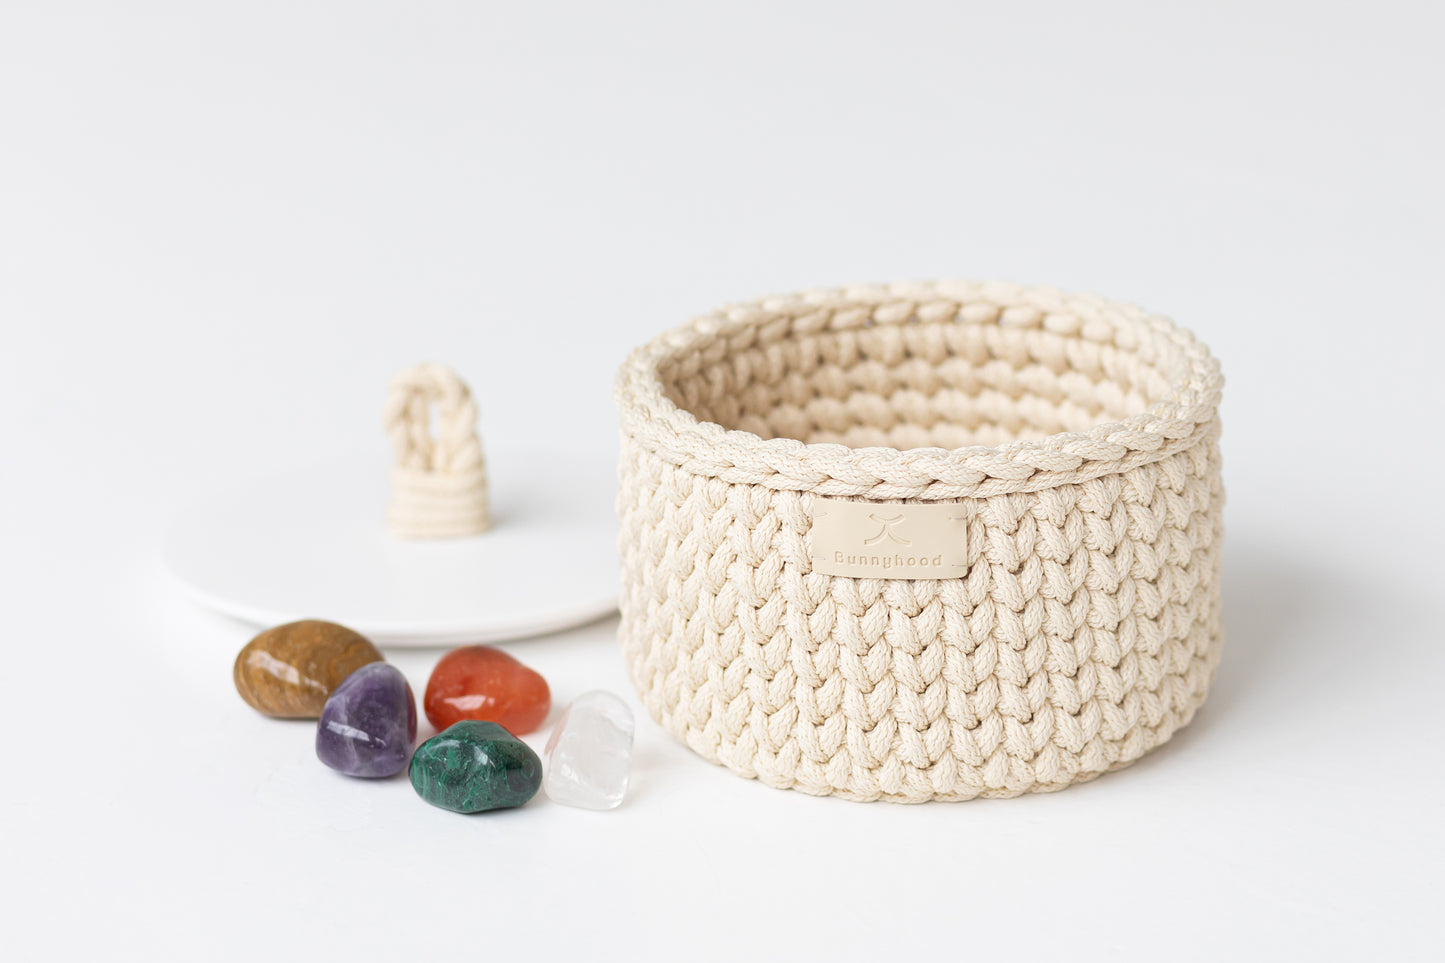 Woven basket with a lid